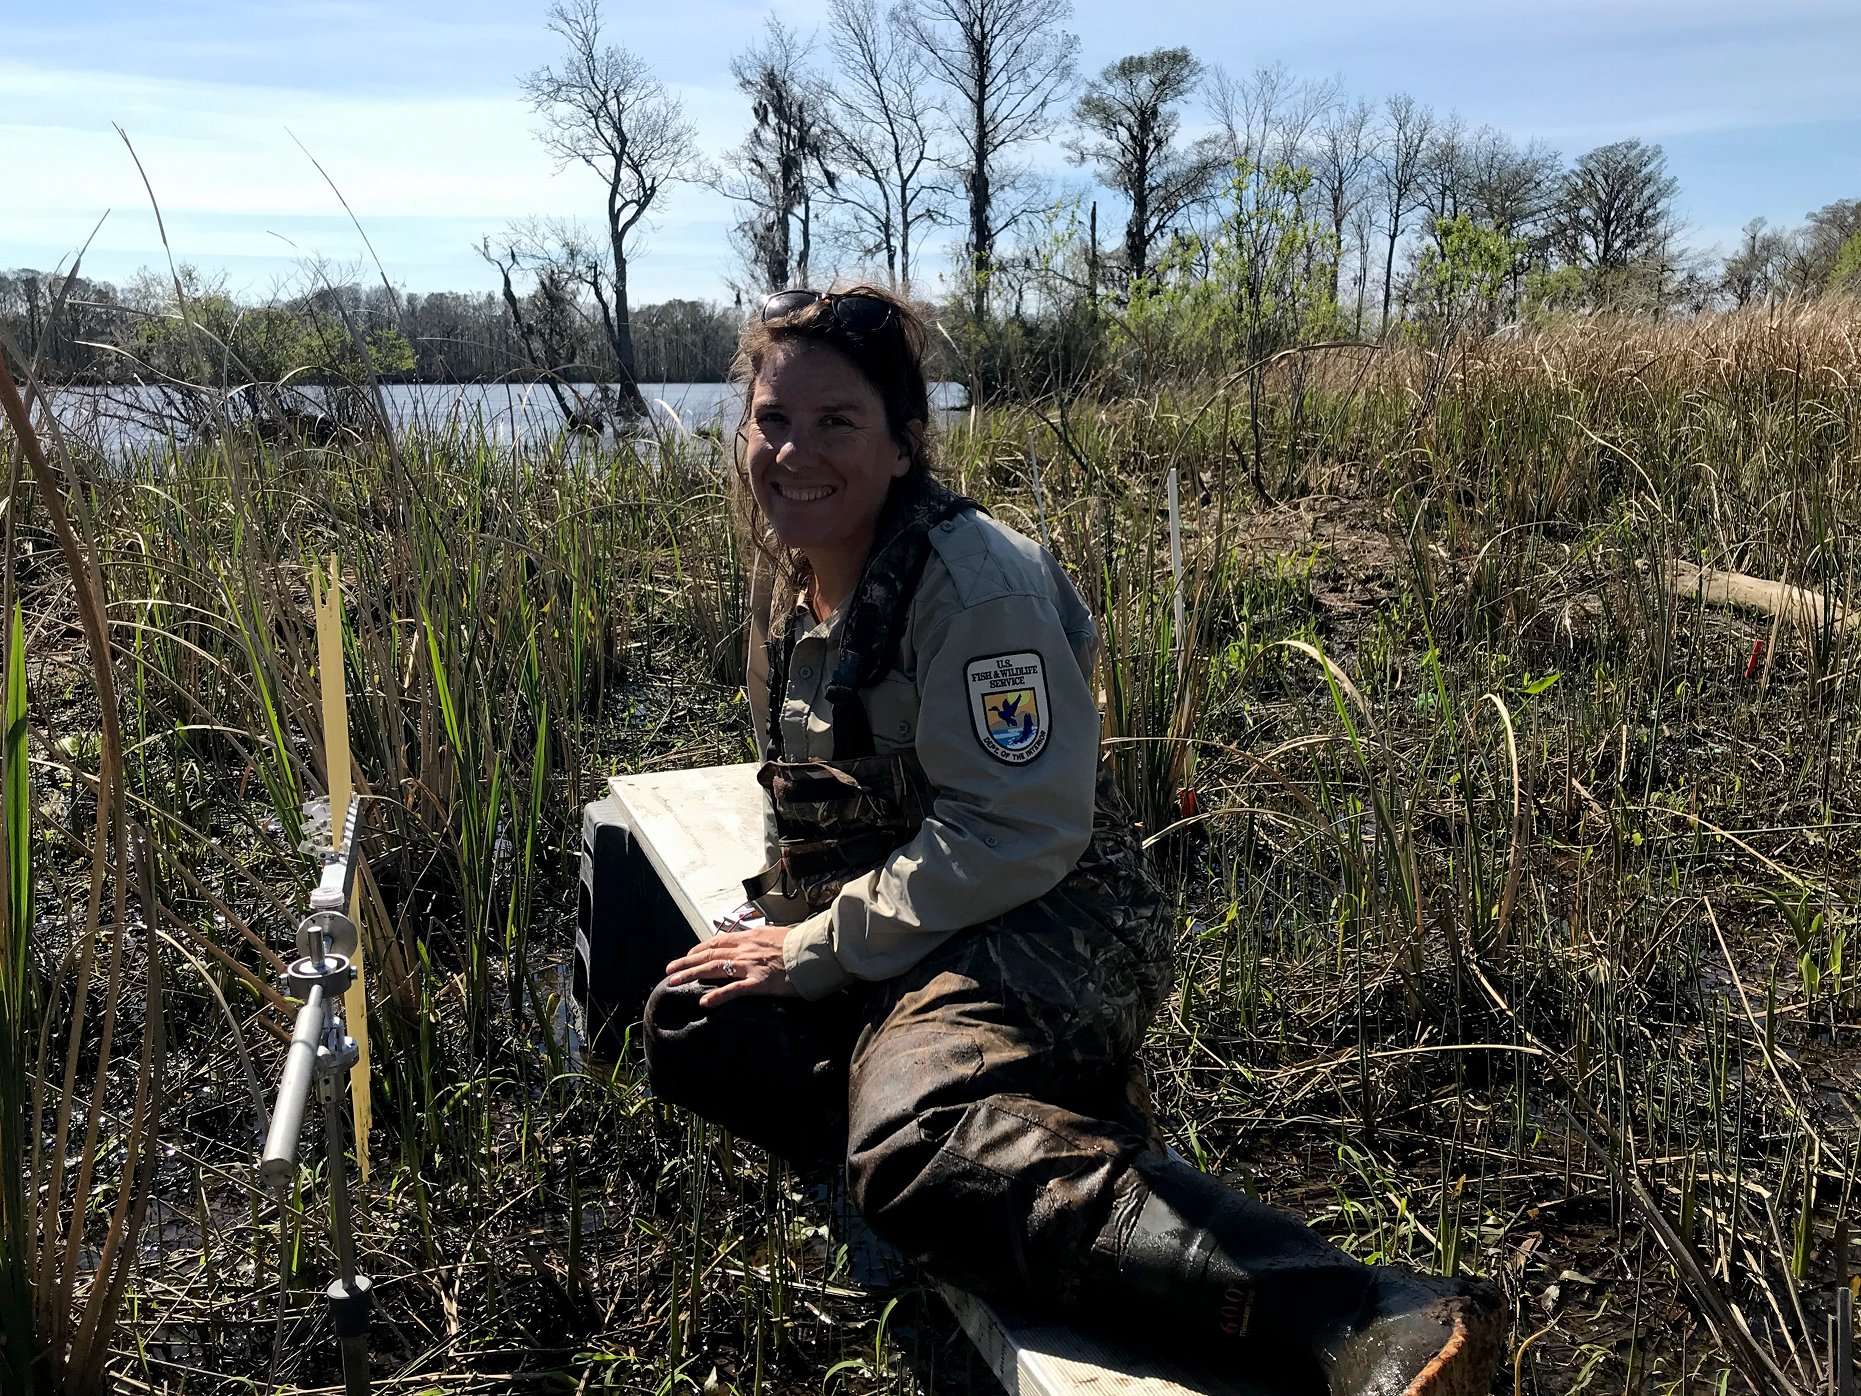 Michelle Moorman monitors a SET station. She sits on a board next to the Surface Elevation Table apparatus, surrounded by marsh habitat, and smiles at the camera.